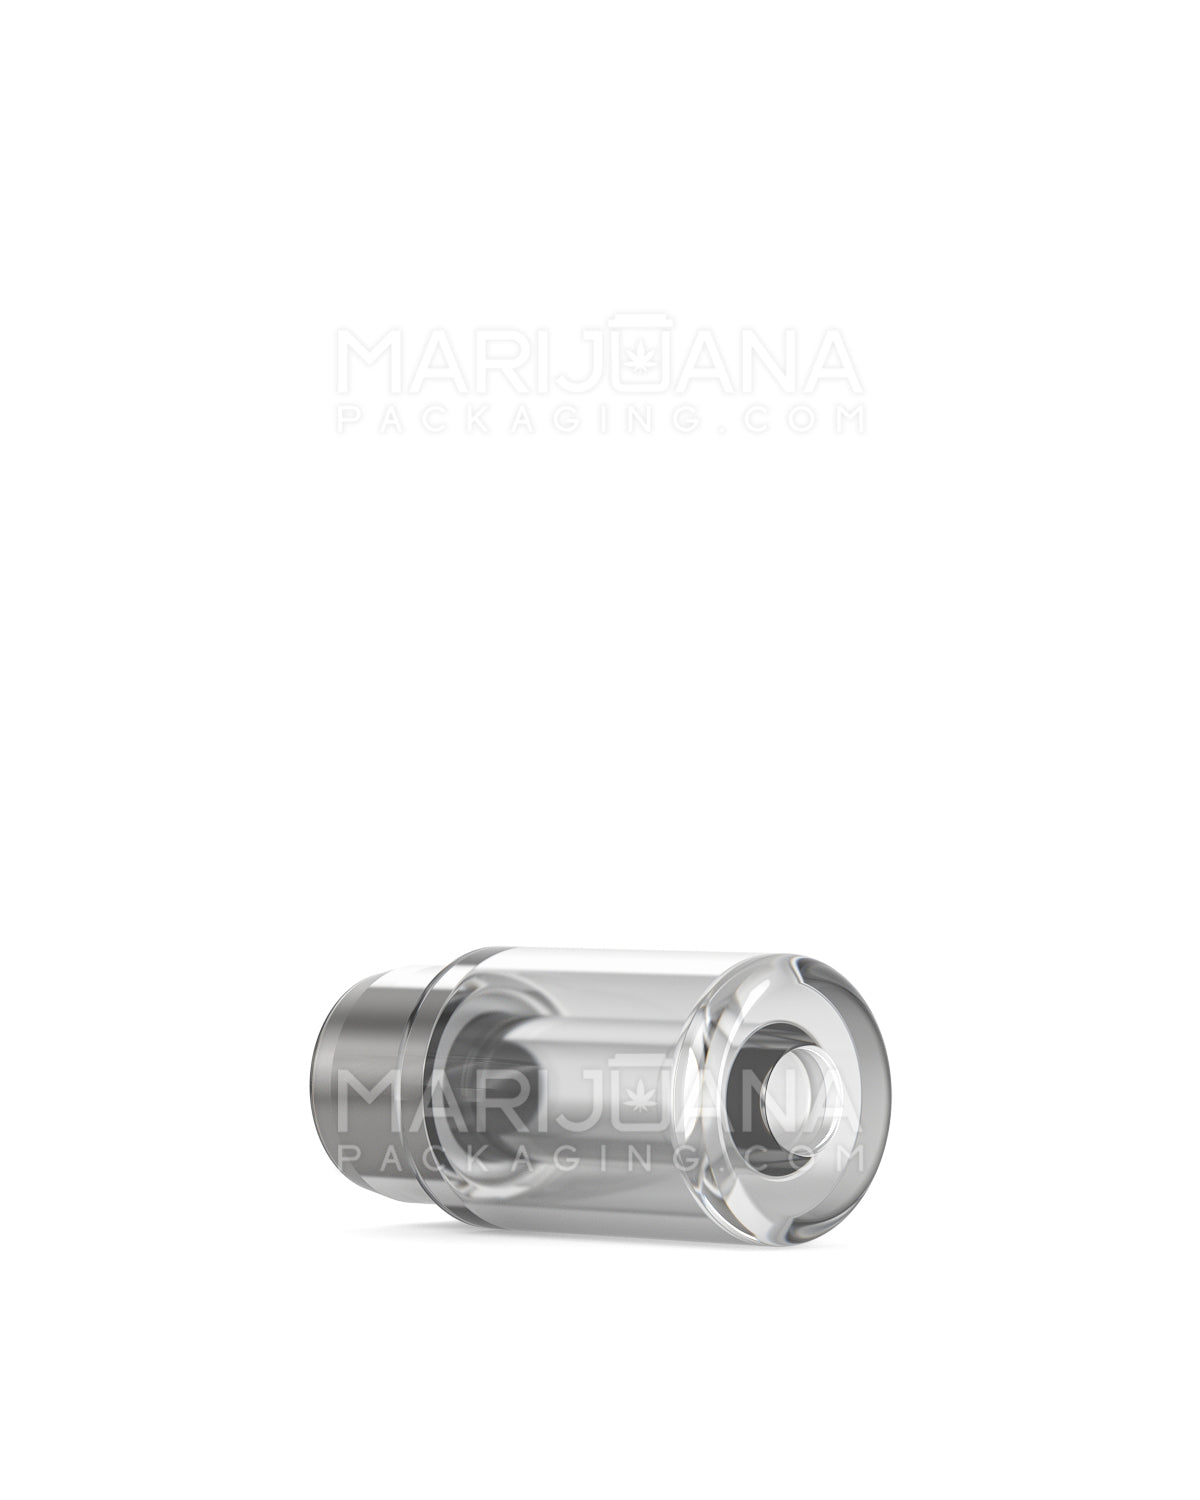 AVD | Round Vape Mouthpiece for Plastic Cartridges | Clear Plastic - Press On - 600 Count - 5